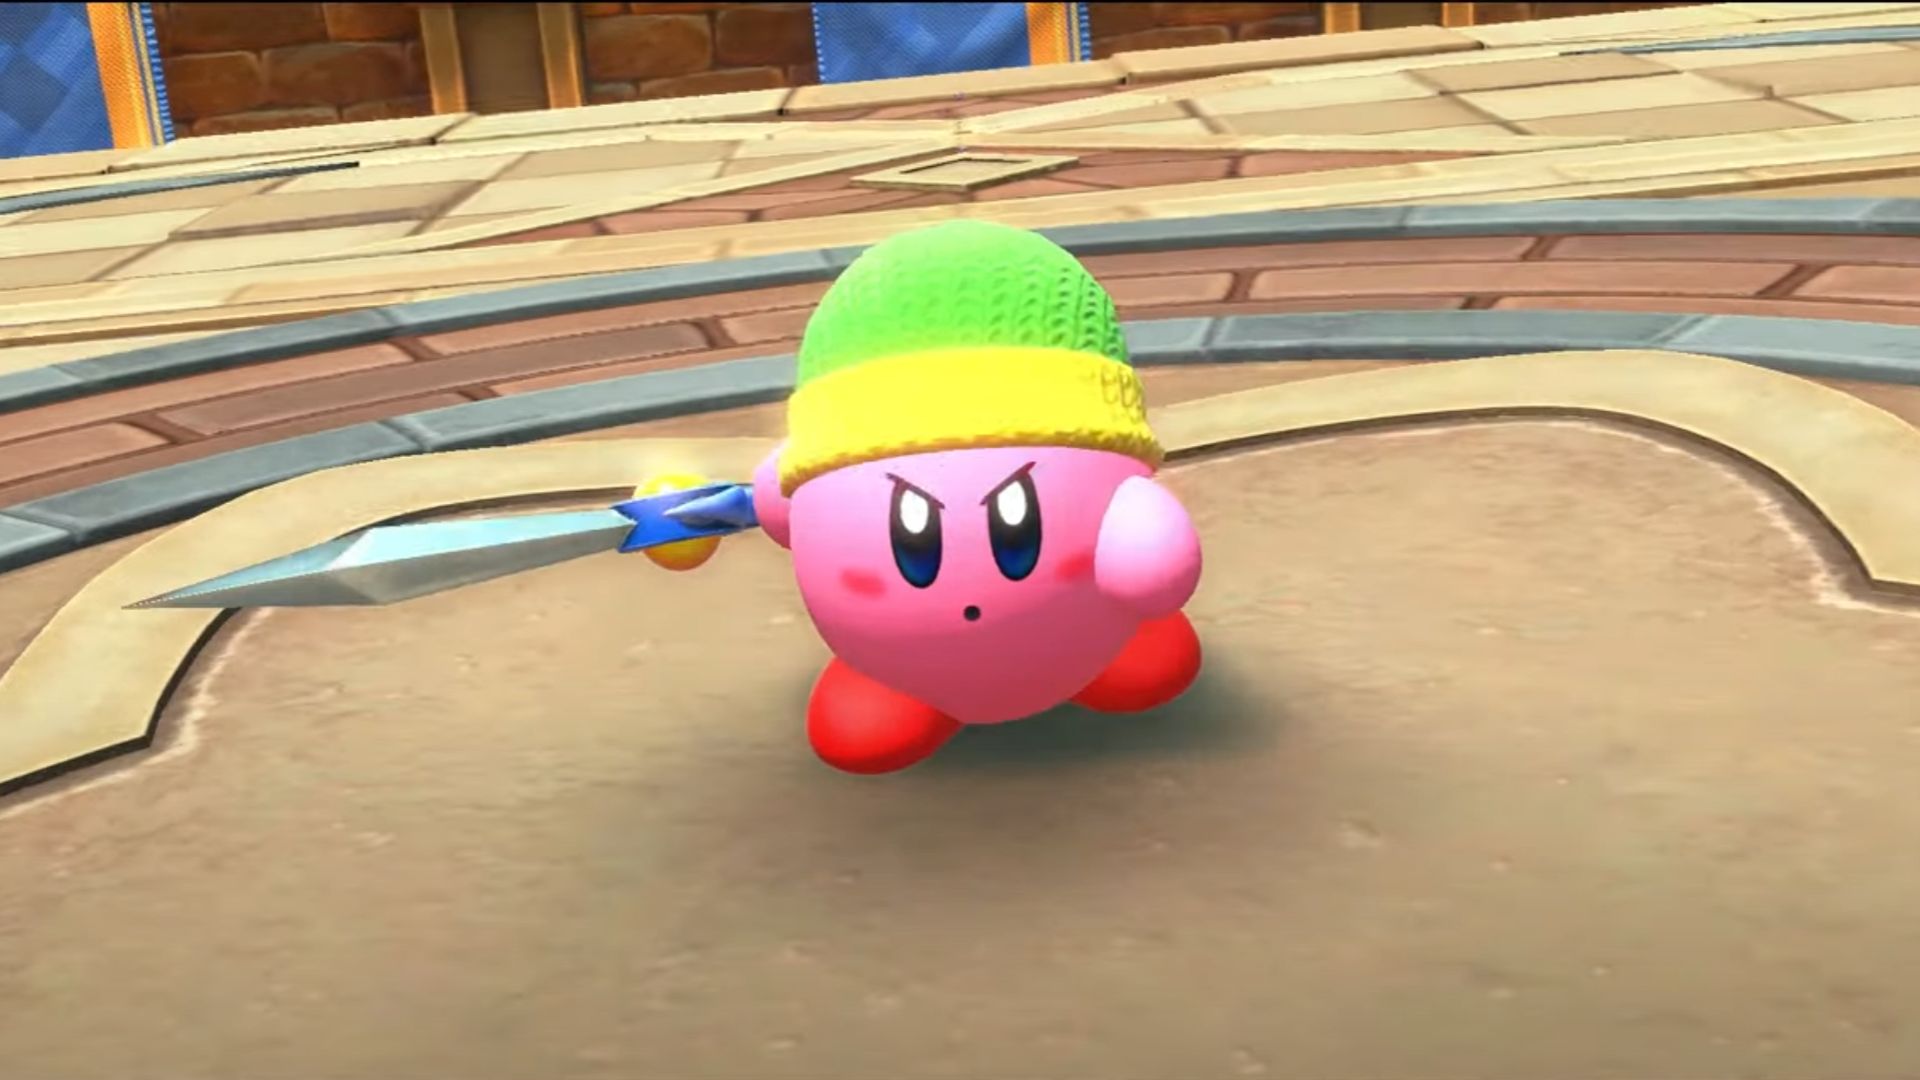 Kirby's creators on developing accessible games, and the darker